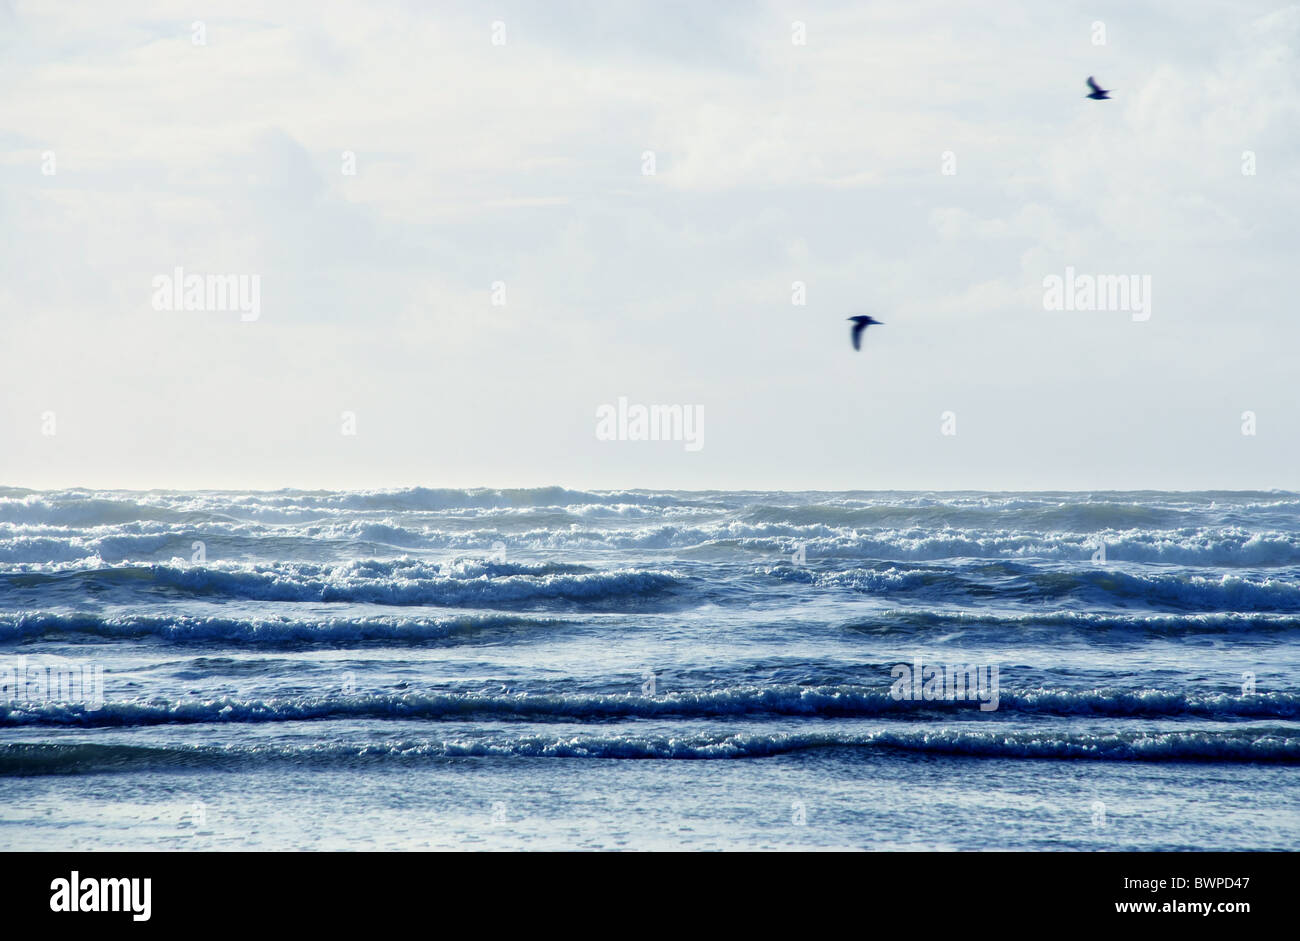 Two birds flying through the air above the waves of the sea. Stock Photo